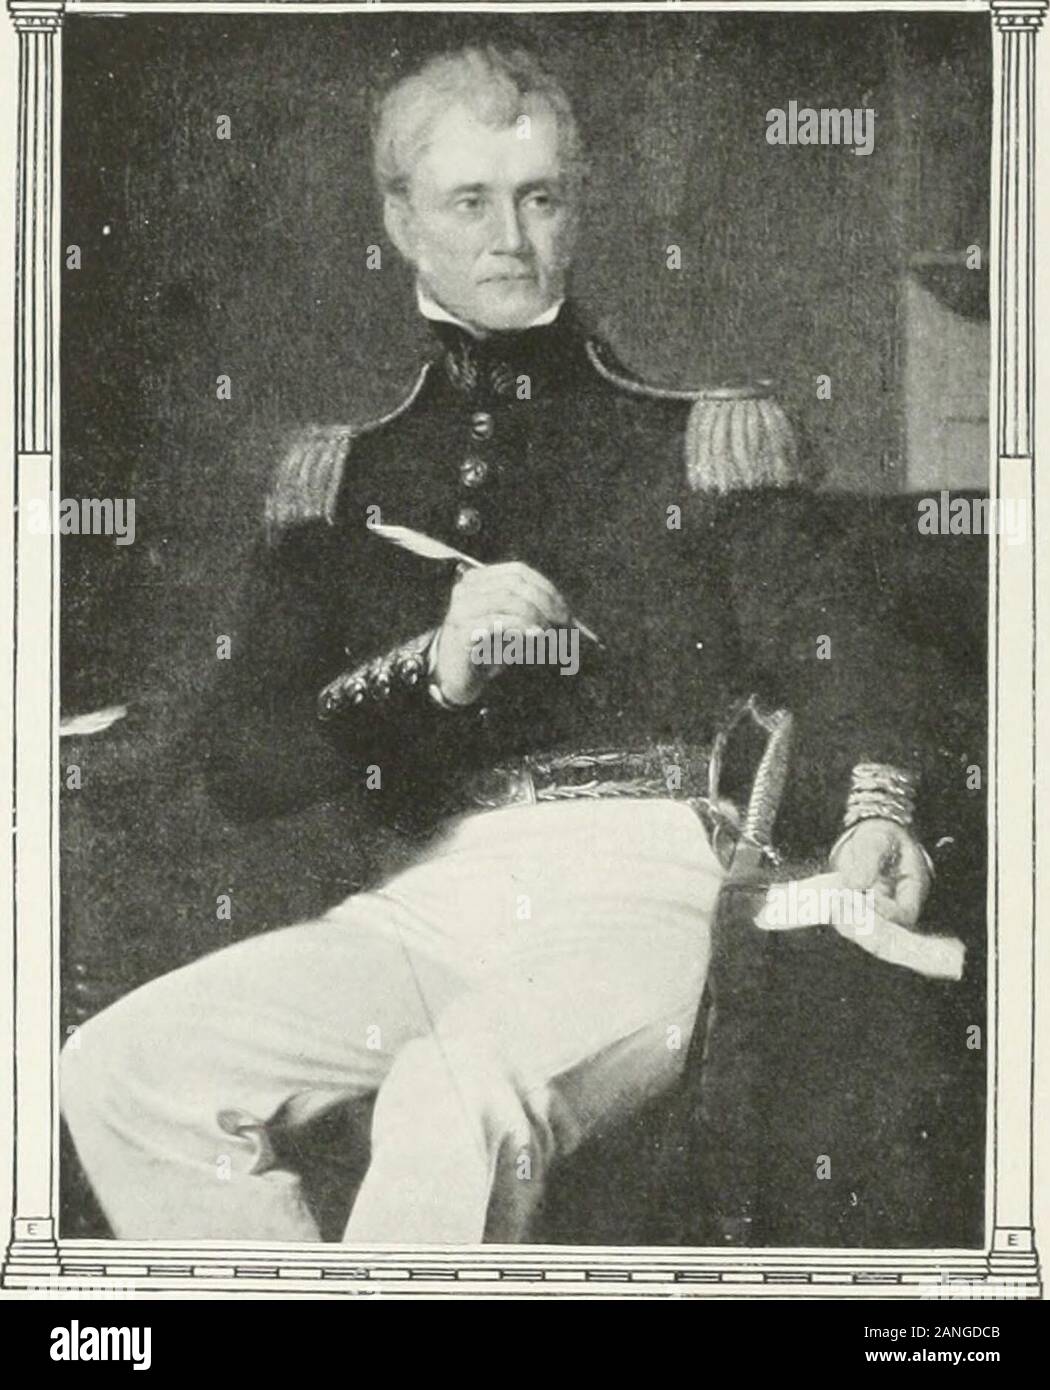 The centennial of the United States Military academy at West Point, New York1802-1902 . MAJOR SYLVANUS THAYER, CORPS OF ENGINEERS, SUPERINTENDENTU. S. M. A., 1817-1833. THE CENTENNIAL OF THE UNITEDSTATES MILITARY ACADEMY ATWEST POINT, NEW YORK. ^ =^ ^ ^ 1802-1902 Volume IADDRESSES AND HISTORIES tlb WASHINGTON GOVERNMENT PRINTING OFFICE1904 BADGE OF THE ASSOCIATION OF GRADUATES OF THE UNITEDSTATES MILITARY ACADEMY Stock Photo